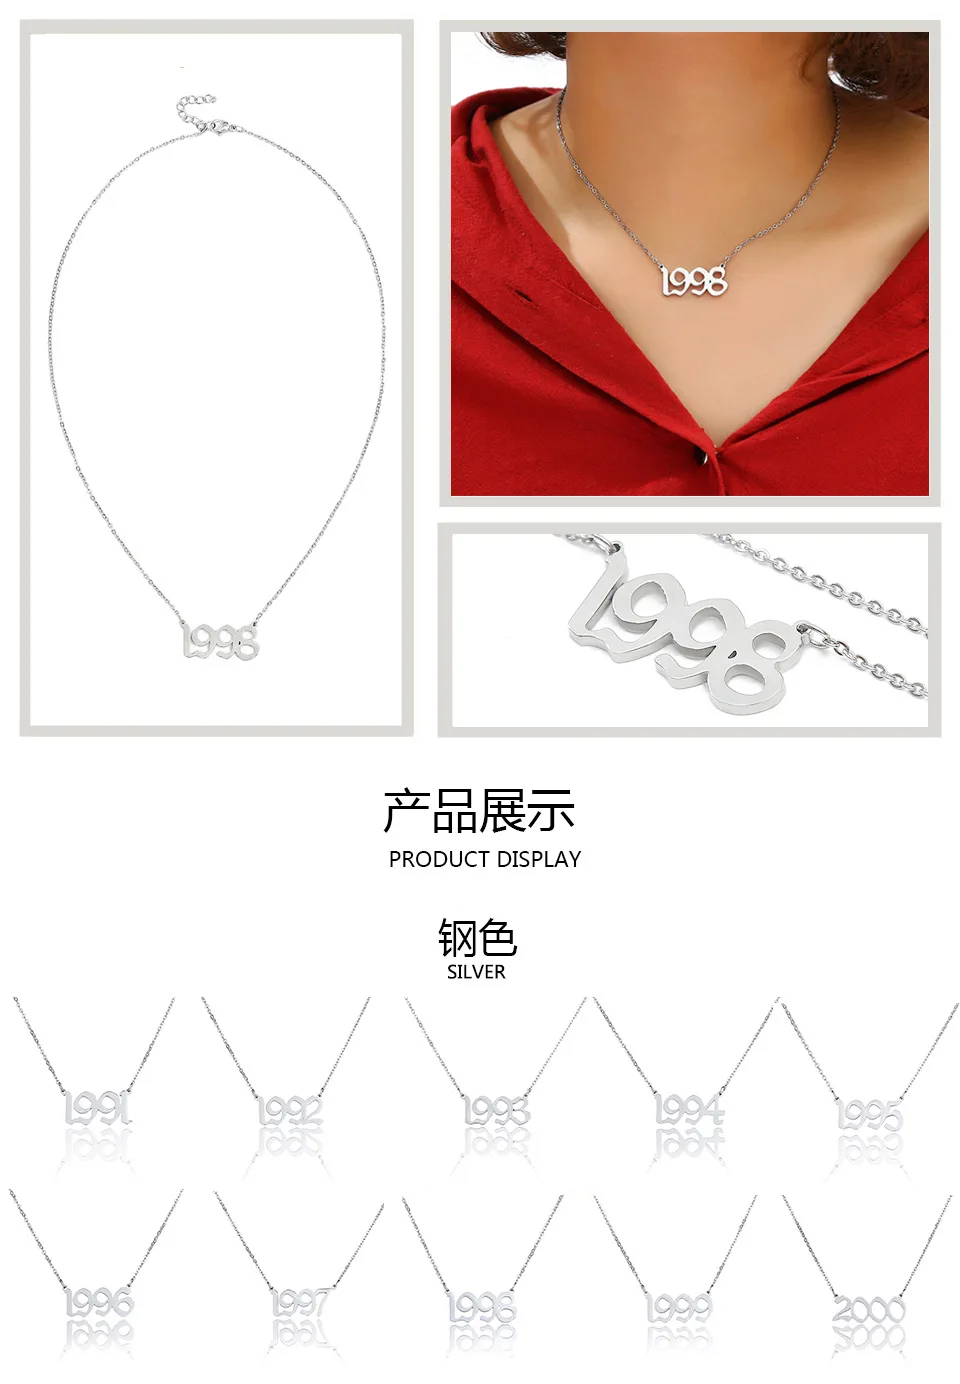 1993 birth year necklace stainless steel fancy birthday gift jewelry wholesale necklace year